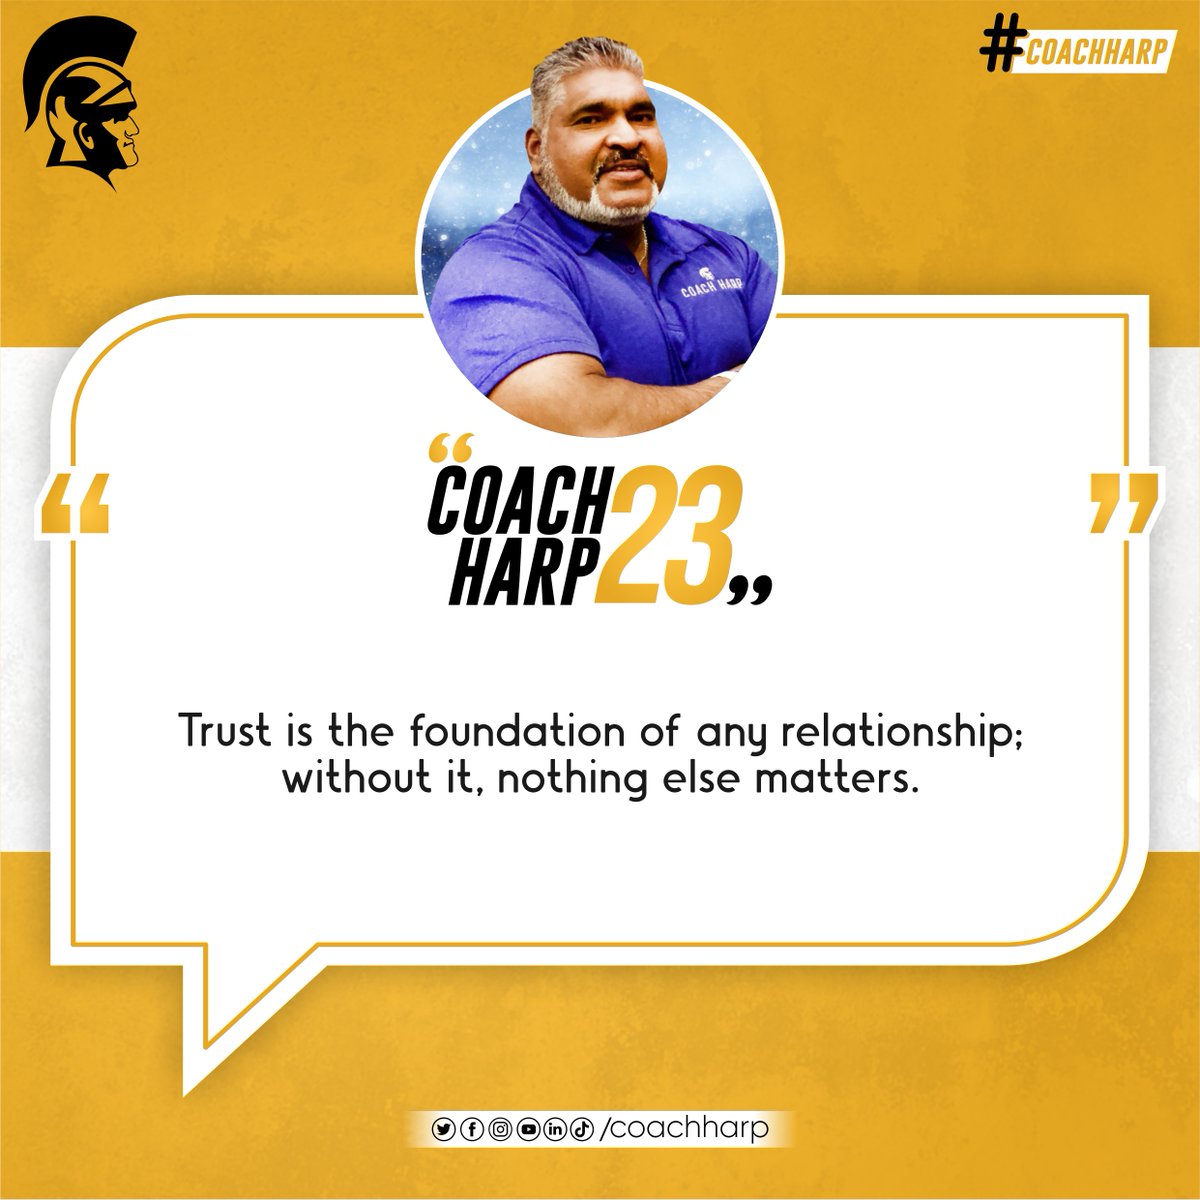 Drop your expectations and focus on building a foundation of trust in every relationship: it's worth it!

 #buildingtrust #buildingstrongbonds #fosteringrelationships #relationshipsmatter #trustiskey #coachharp